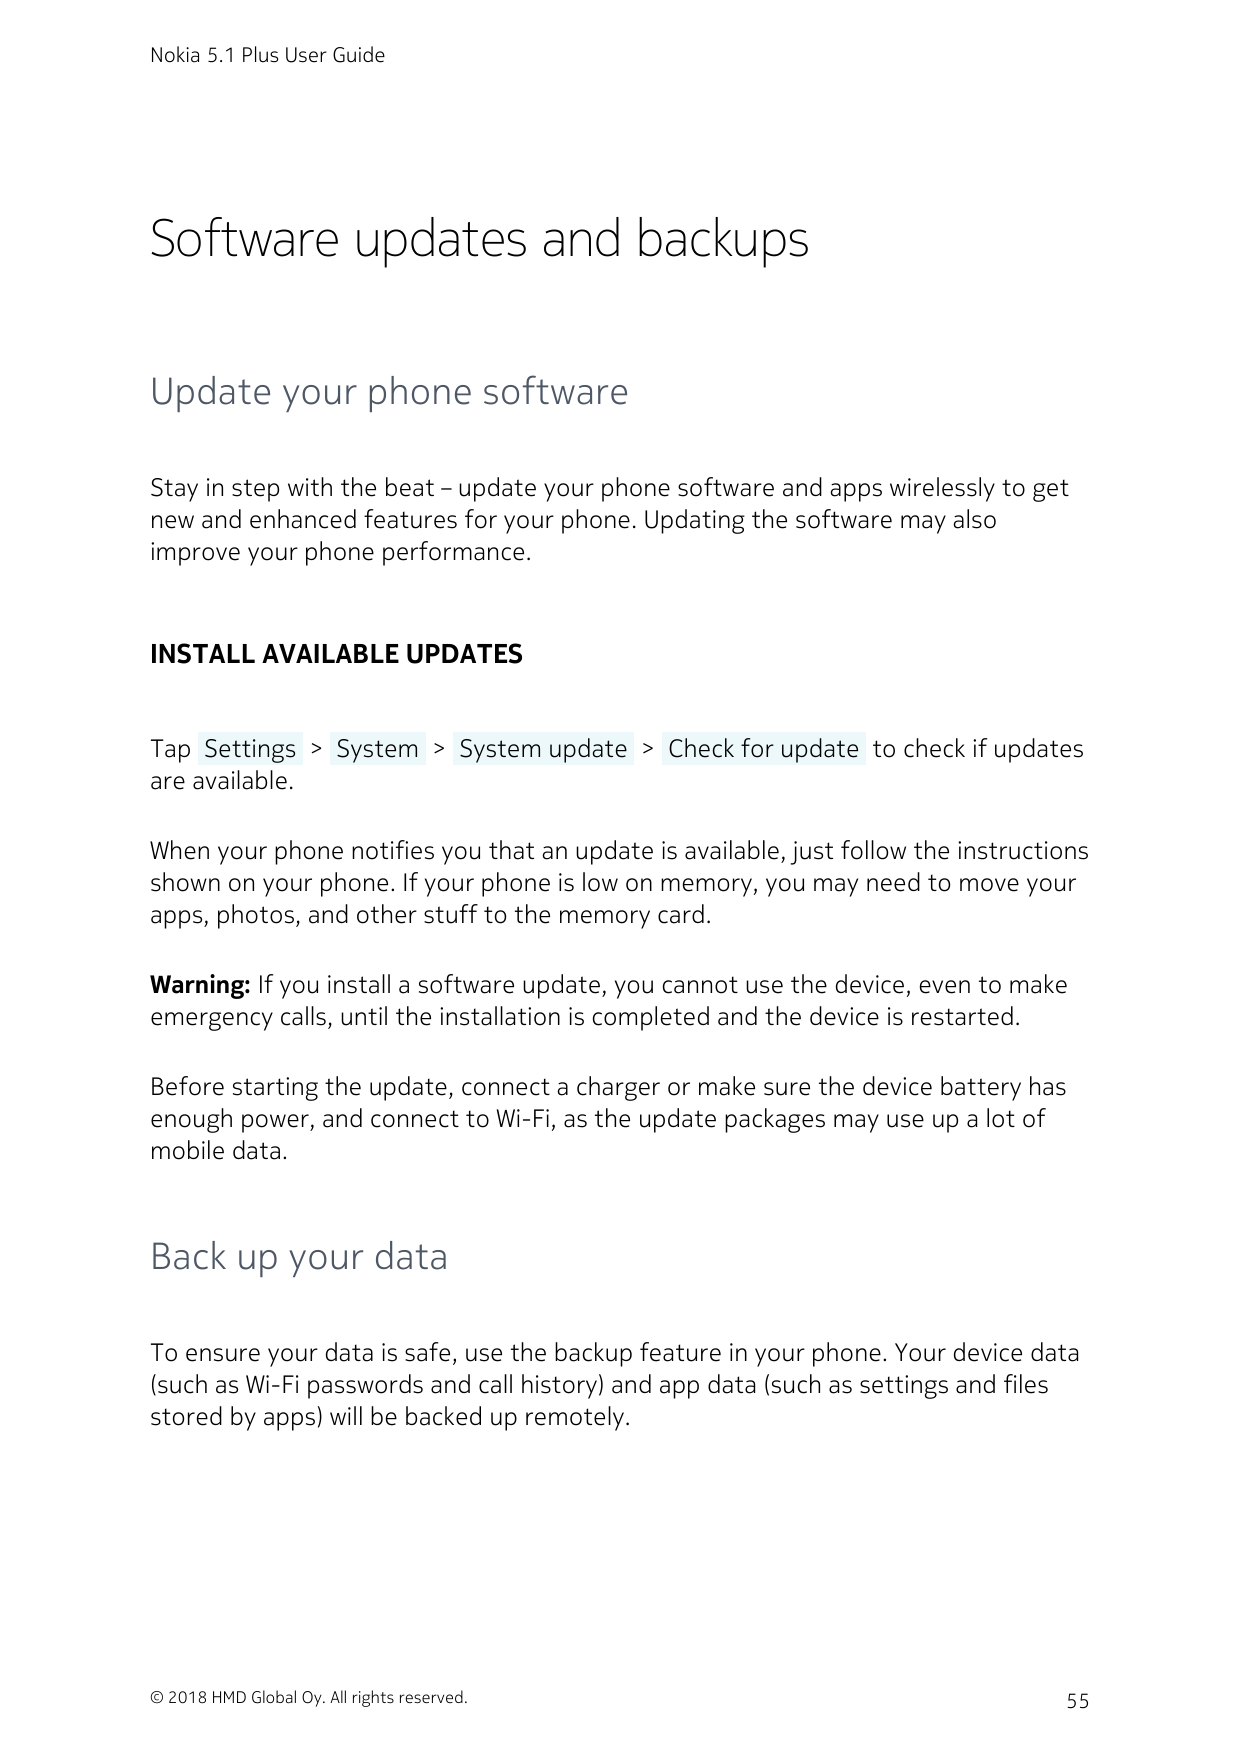 Nokia 5.1 Plus User GuideSoftware updates and backupsUpdate your phone softwareStay in step with the beat – update your phone so